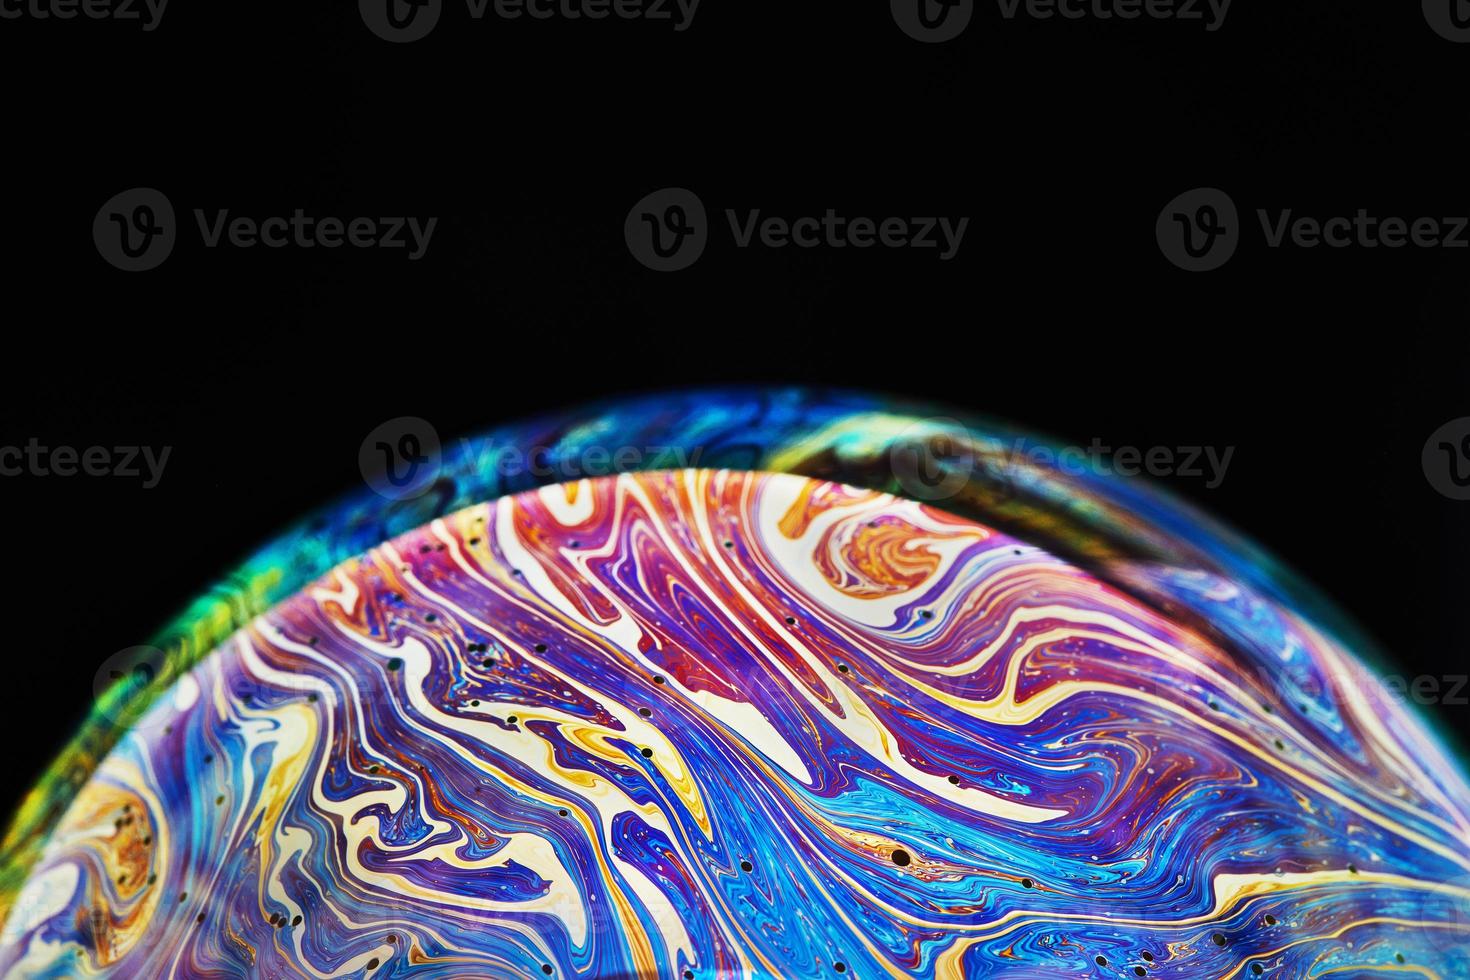 Virtual reality space with abstract multicolor psychedelic planet. Closeup Soap bubble like an alien planet on black background photo